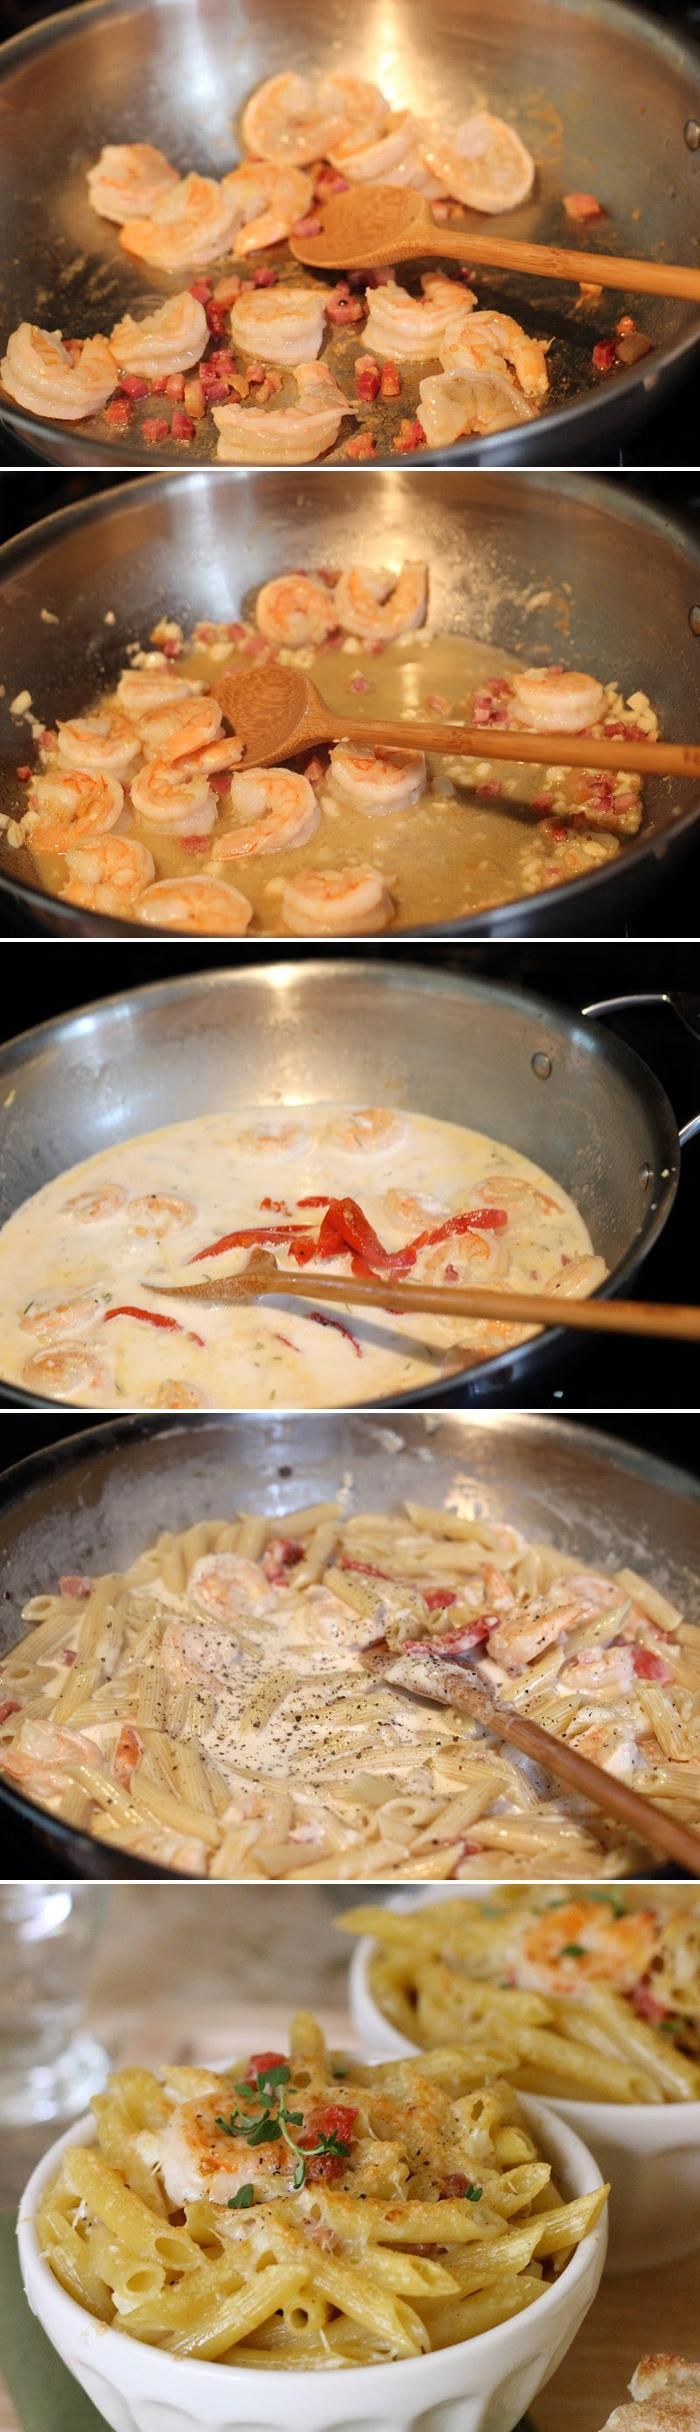 Rustic penne shrimp pasta in a parmesan cream sauce. Can be done with chicken to